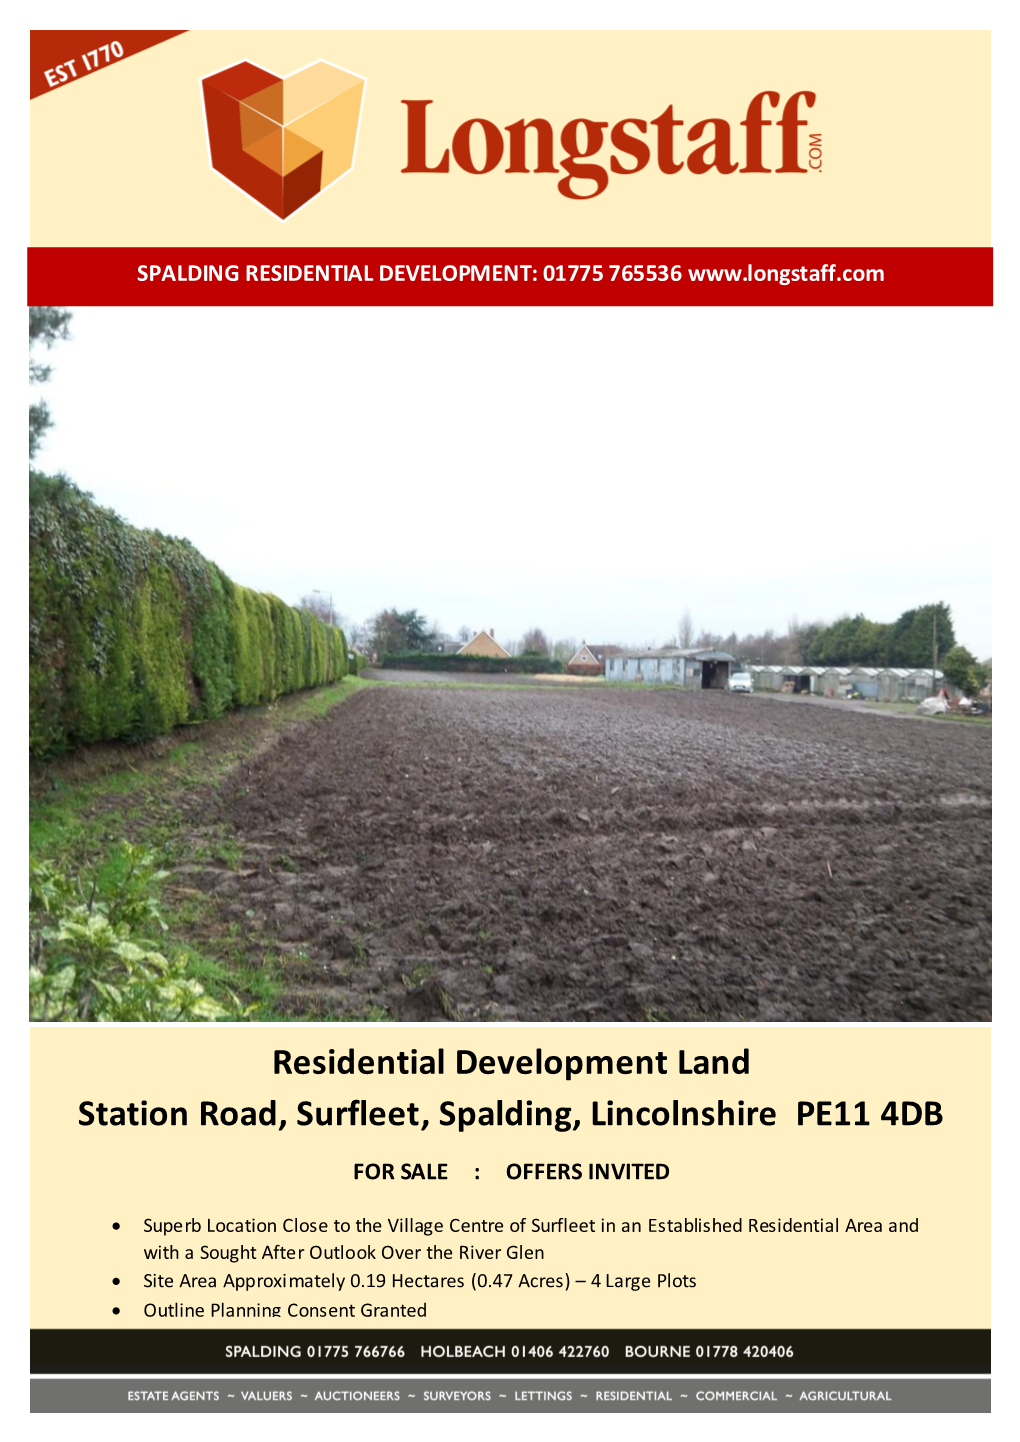 Residential Development Land Station Road, Surfleet, Spalding, Lincolnshire PE11 4DB for SALE : OFFERS INVITED